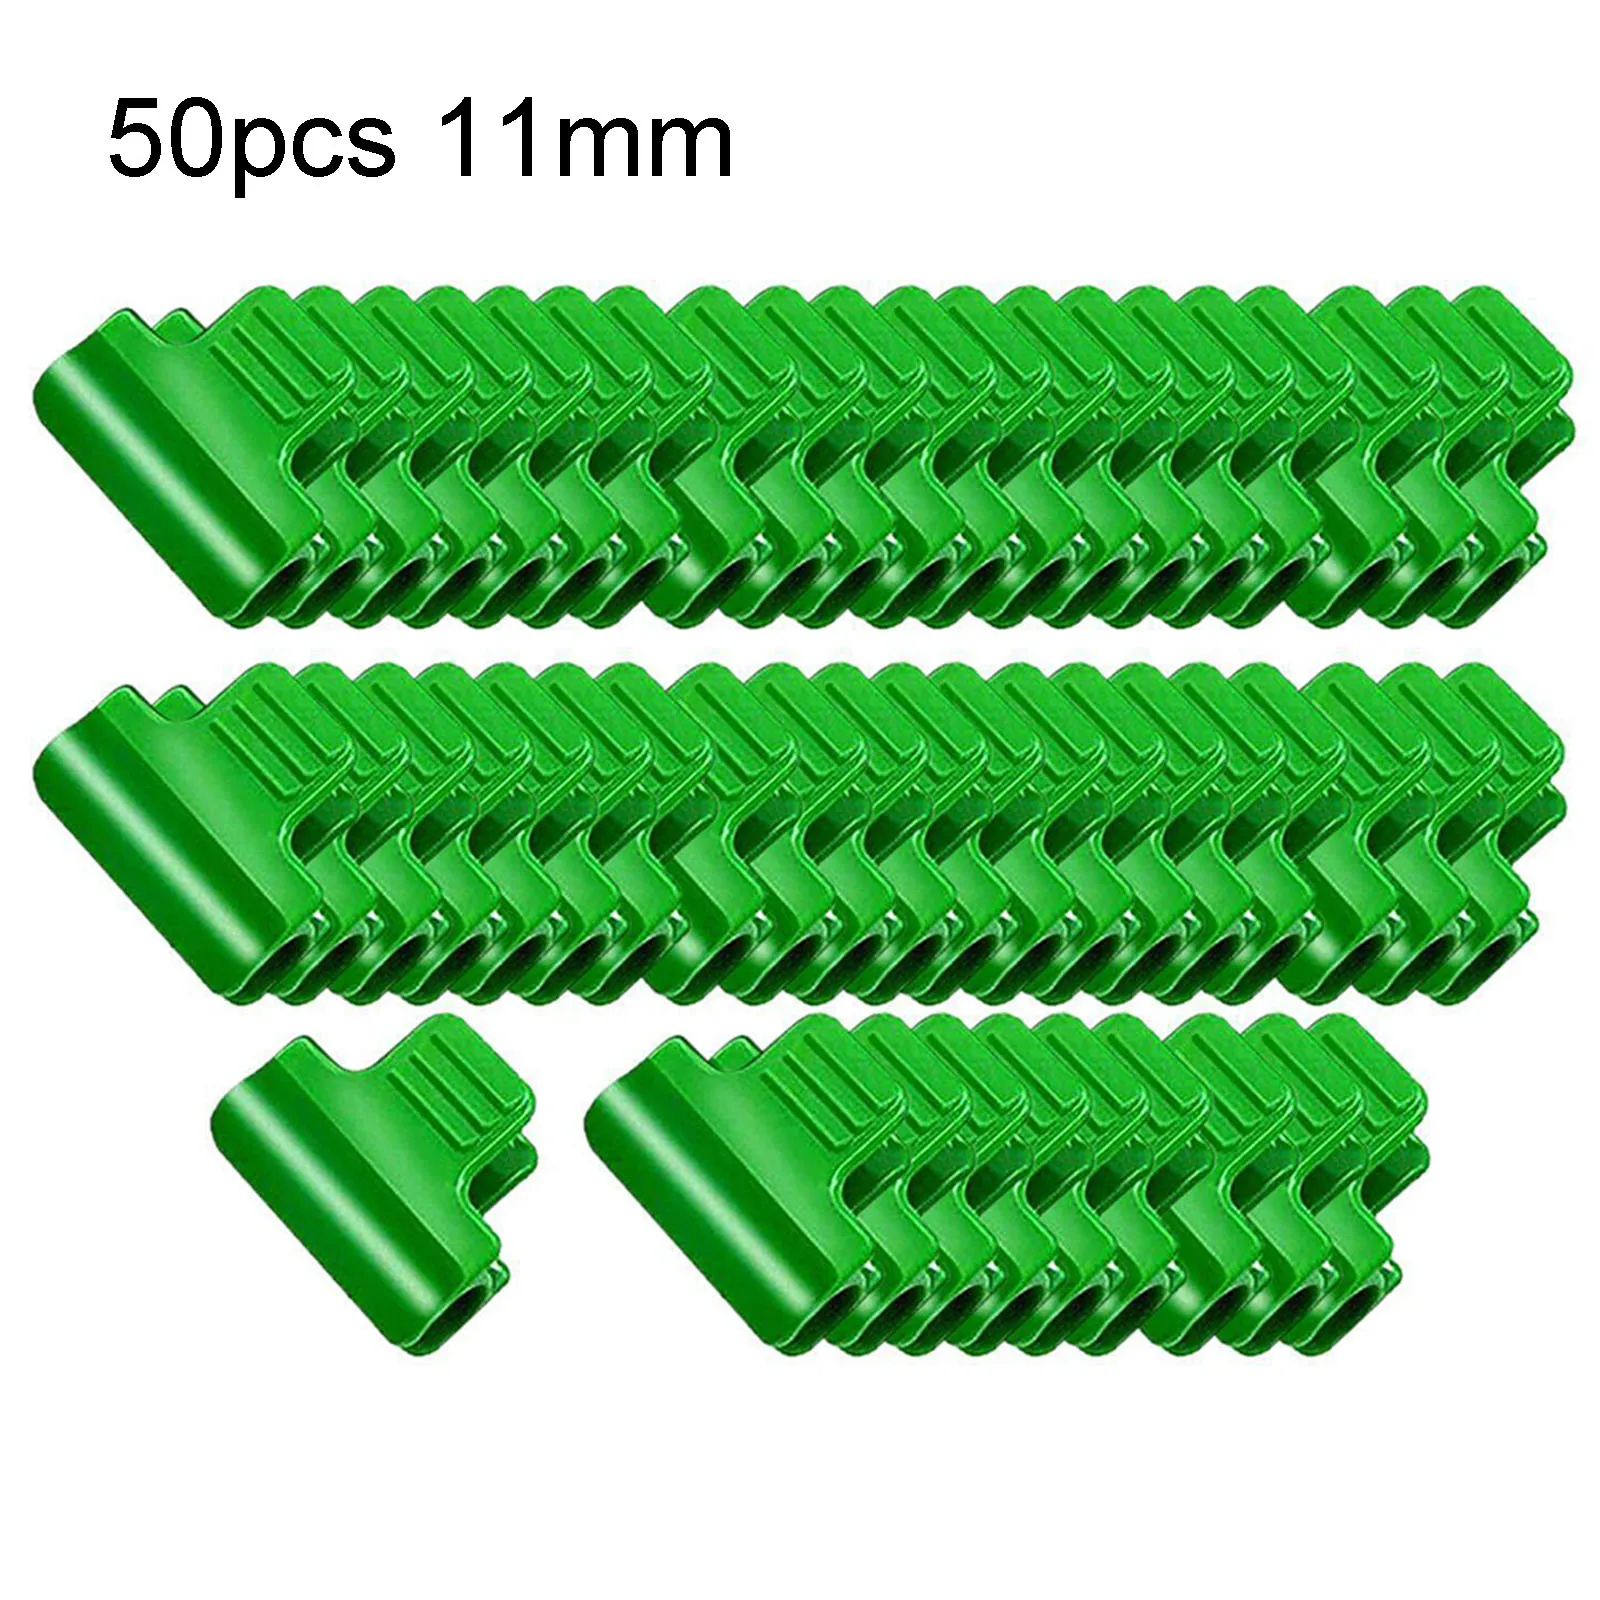 

50pcs Greenhouse Clips For Diameter 11mm(0.43in) / 16mm (0.63in) Plant Greenhouse Frame Tube Netting Tunnel Hoop Clips Parts